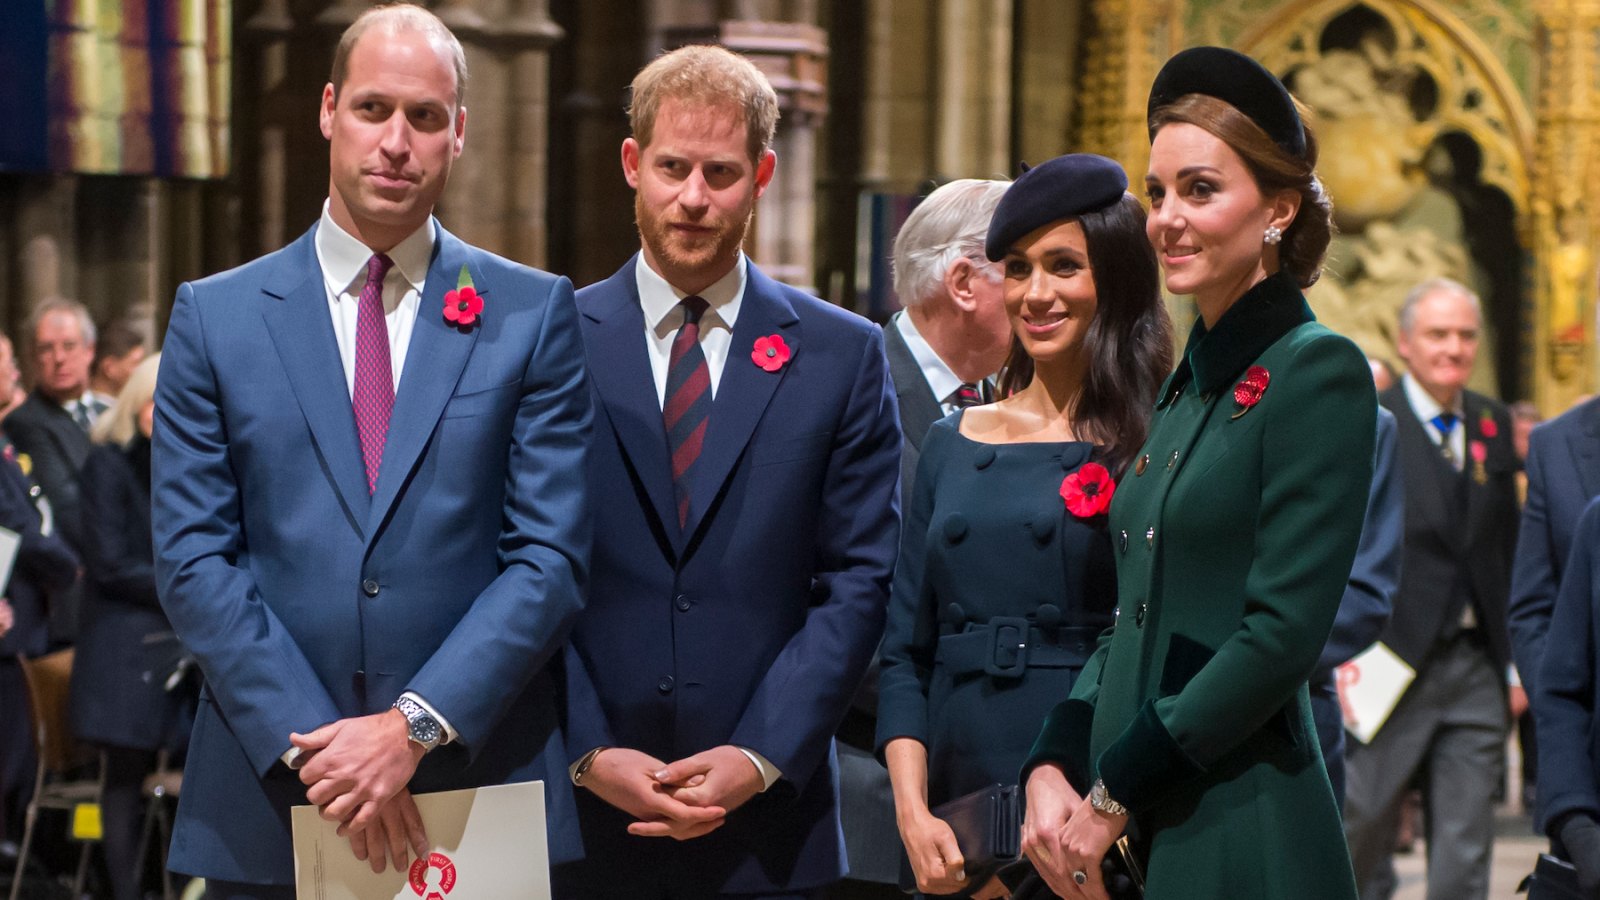 Prince William Says He Has ‘No Idea’ When Duchess Meghan Will Give Birth